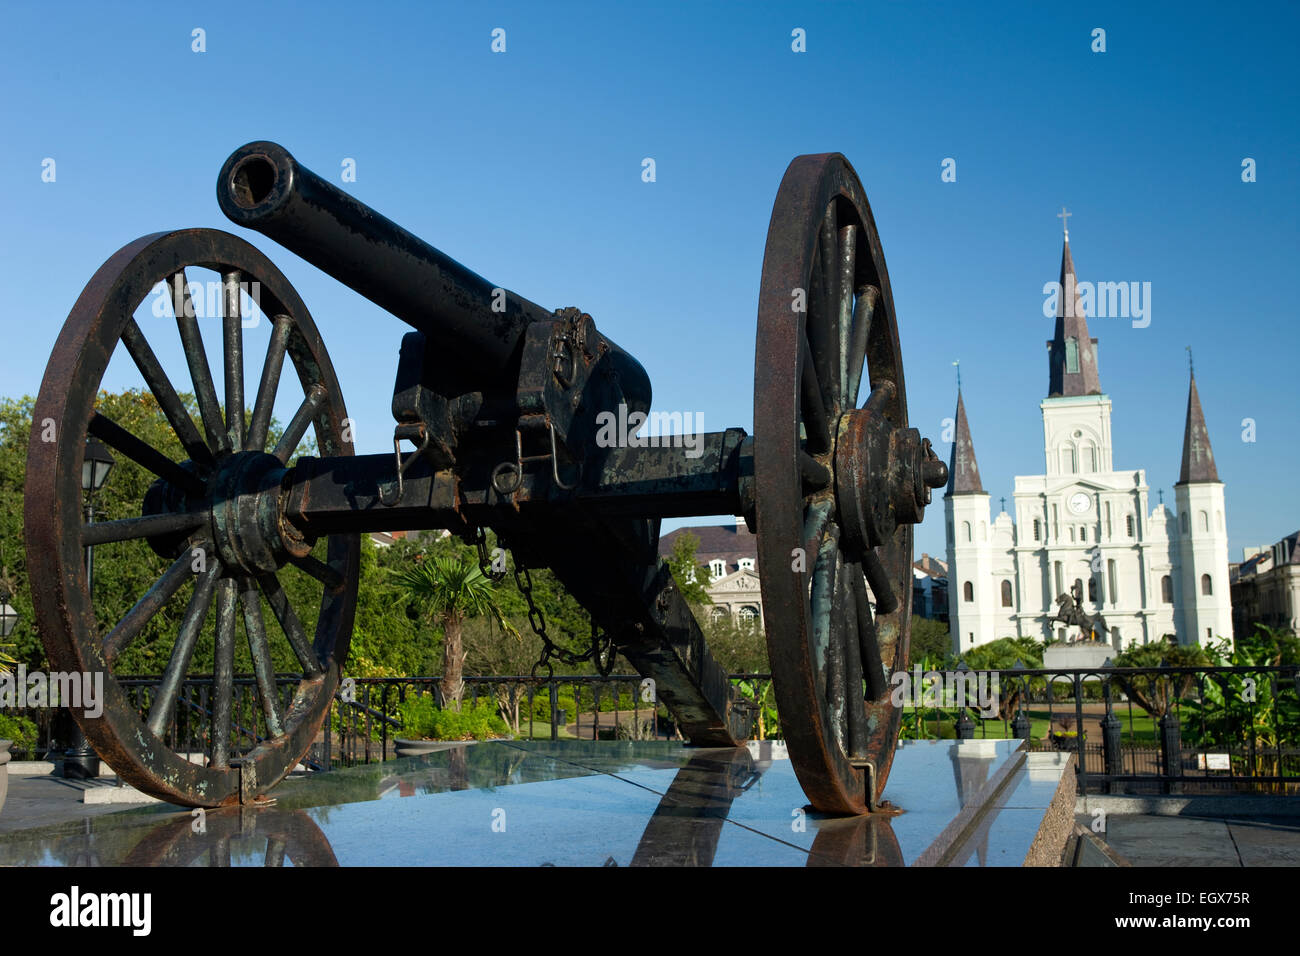 Why all the cannons, New Orleans?